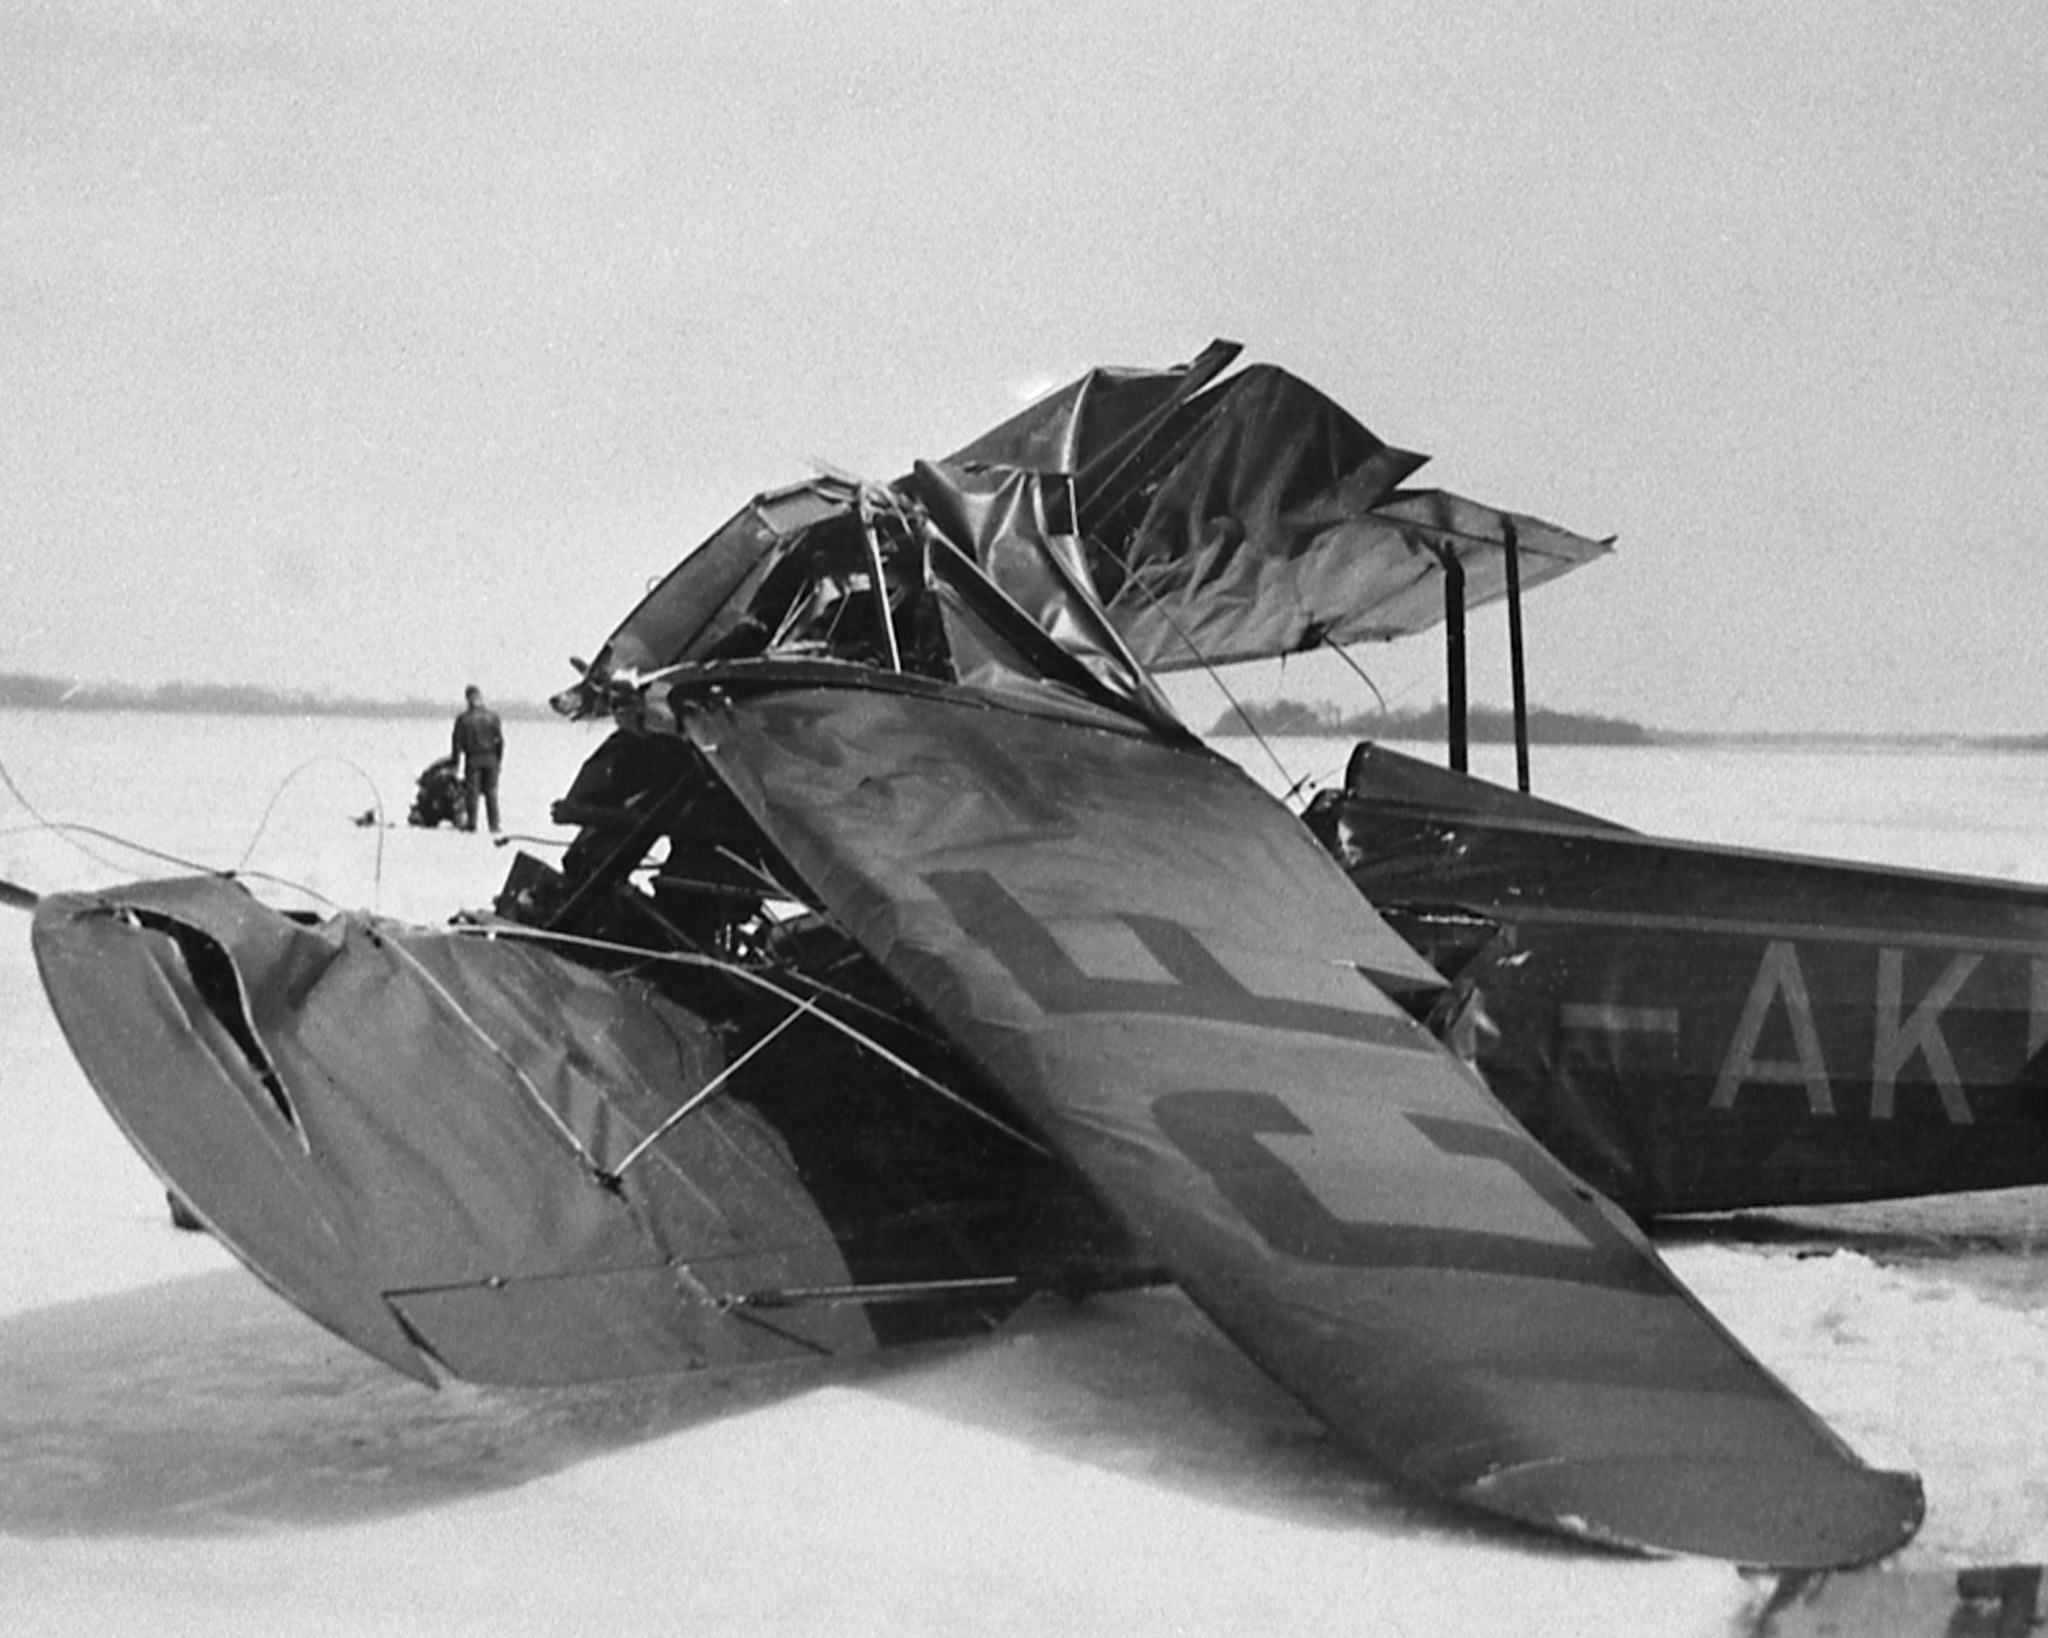 The wreckage of Fairchild KR-21, CF-AKR, on the ice of the Ottawa River on March 12, 1930. Wing Commander (retired) William Barker died in the crash. PHOTO: DND Archives, RE74-165